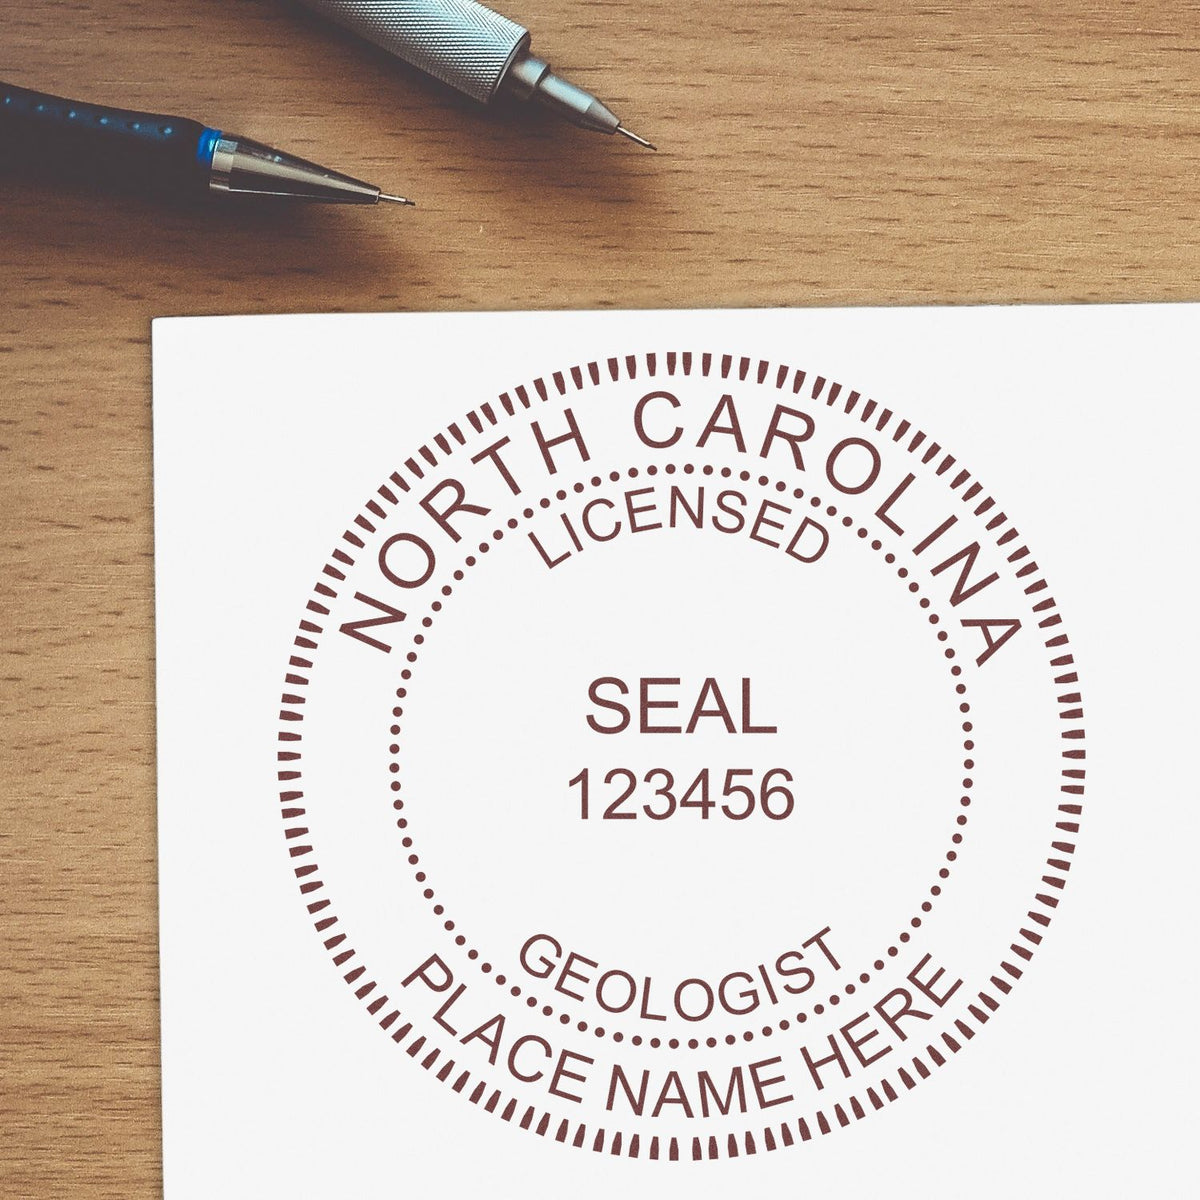 Another Example of a stamped impression of the North Carolina Professional Geologist Seal Stamp on a office form